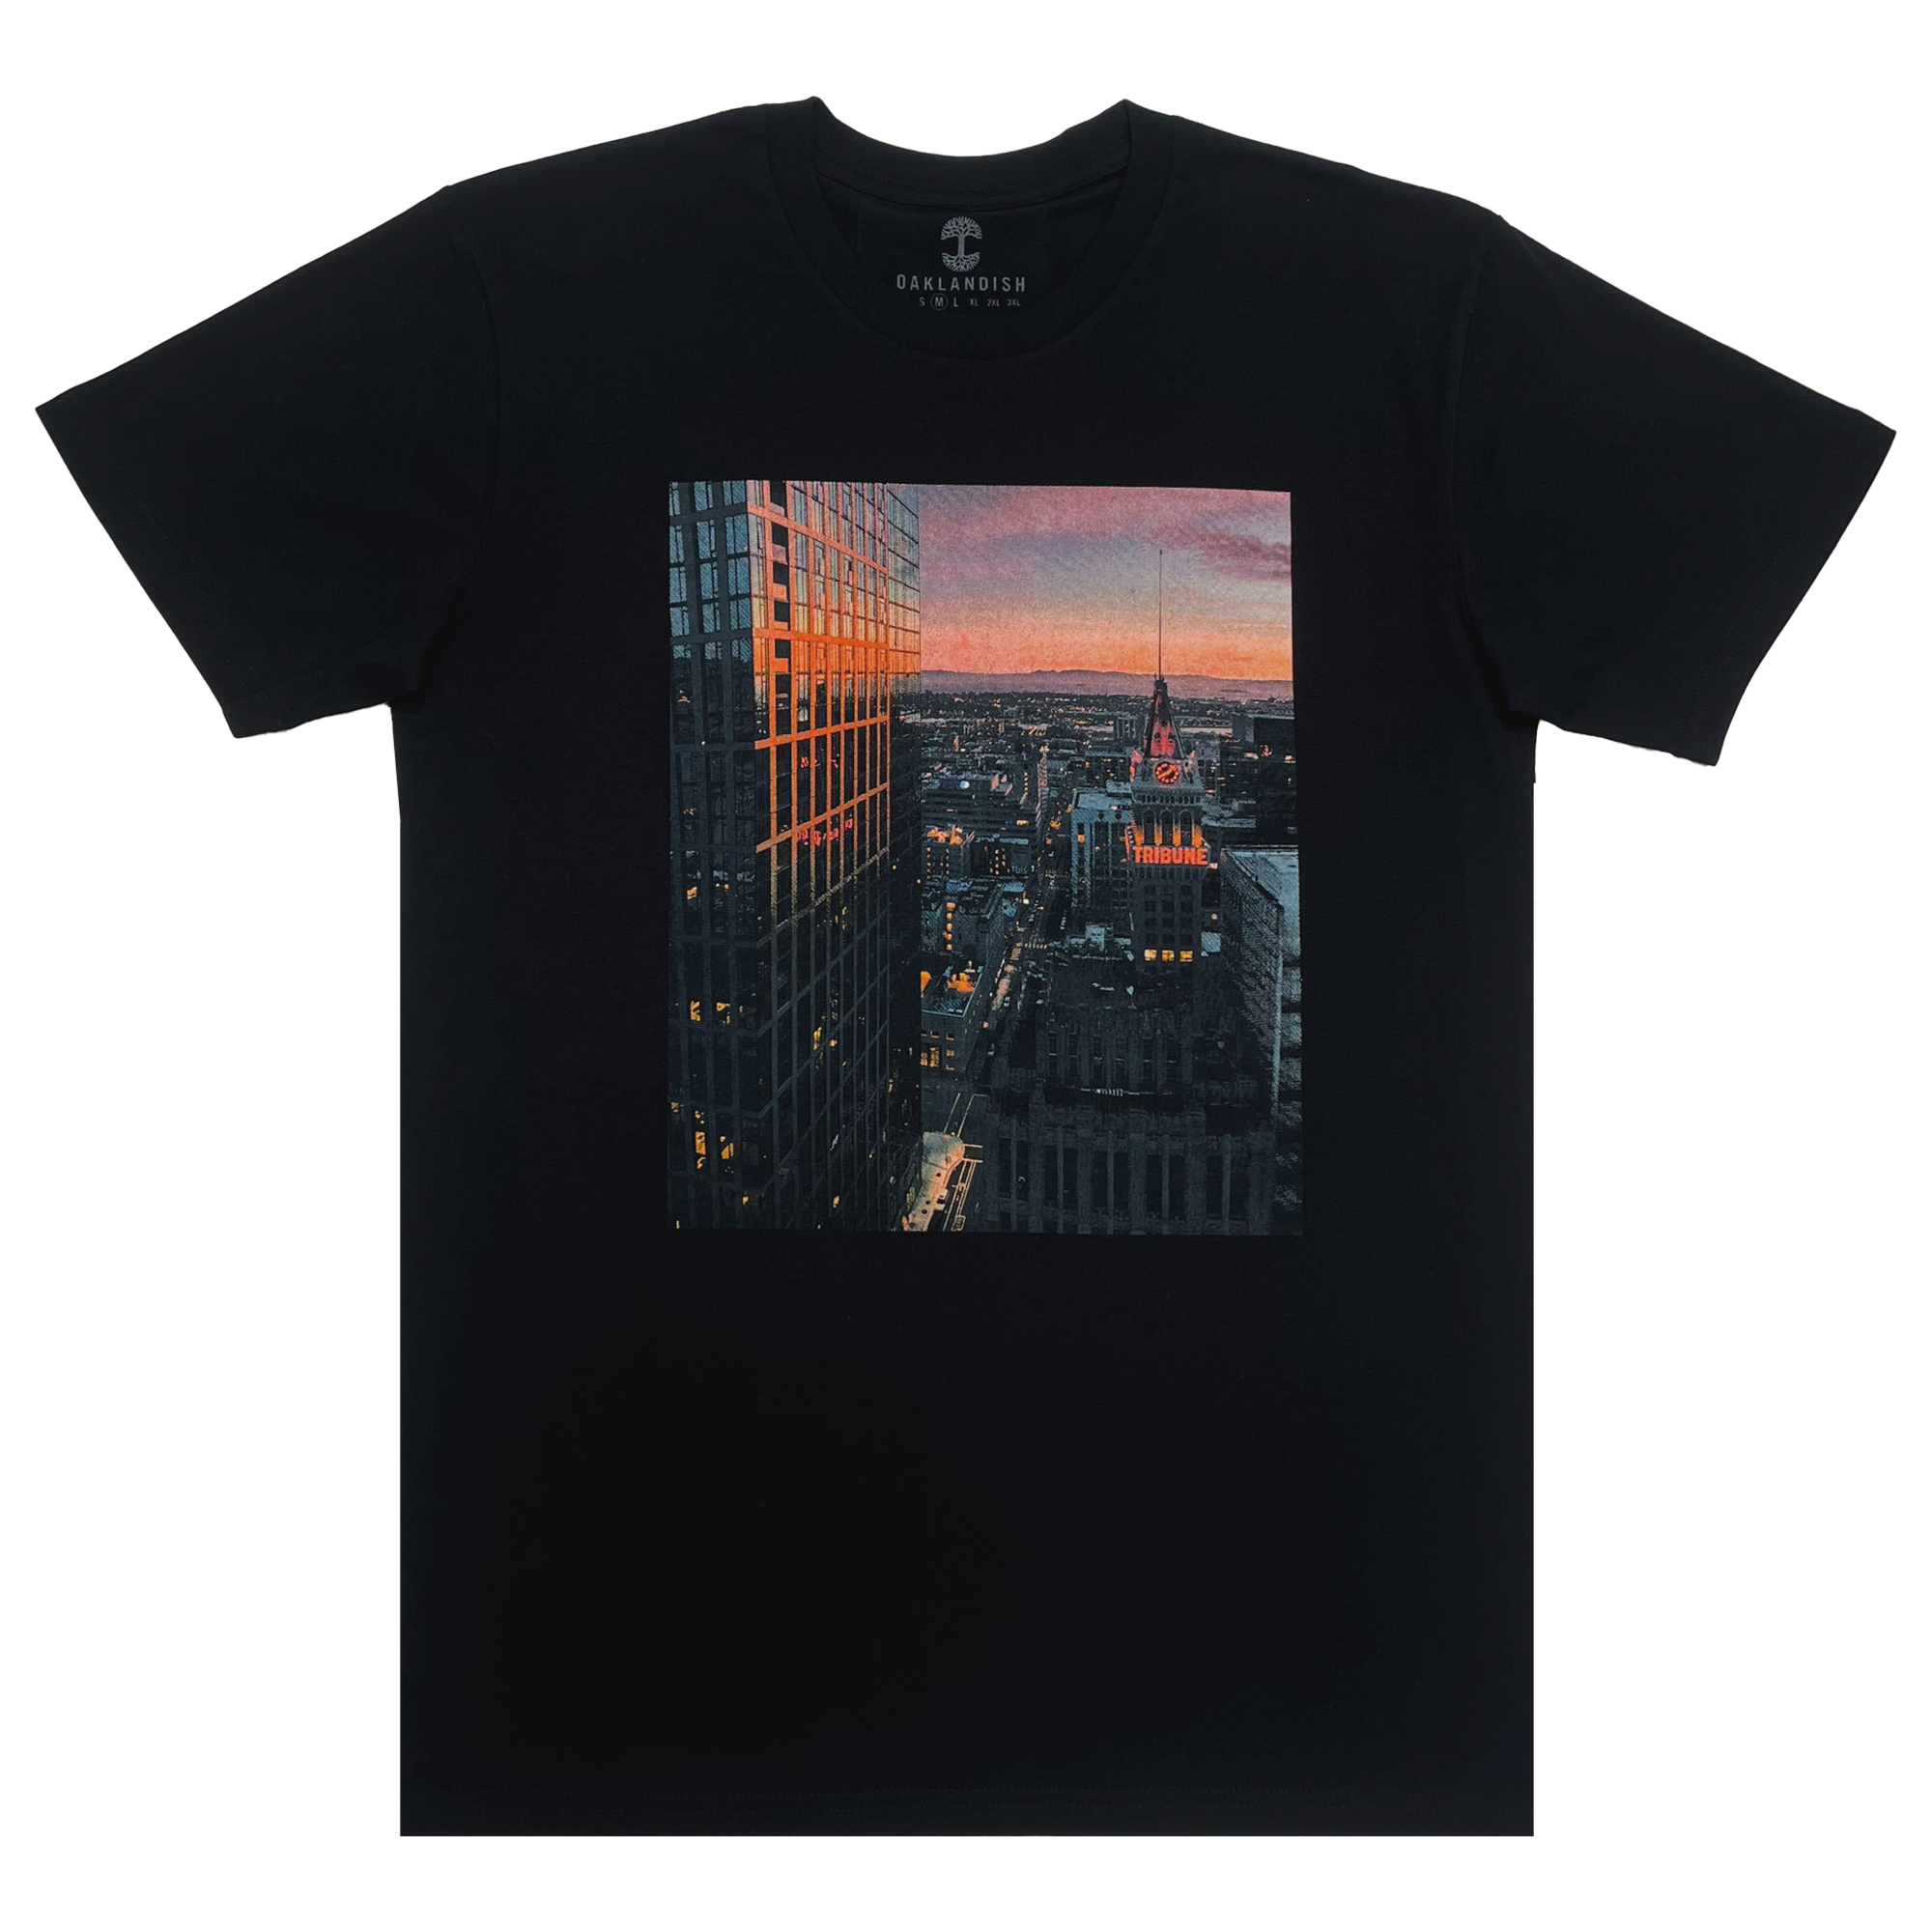 Black t-shirt with Vincent James photography image of the Oakland Tribune building and the Downtown Oakland landscape.